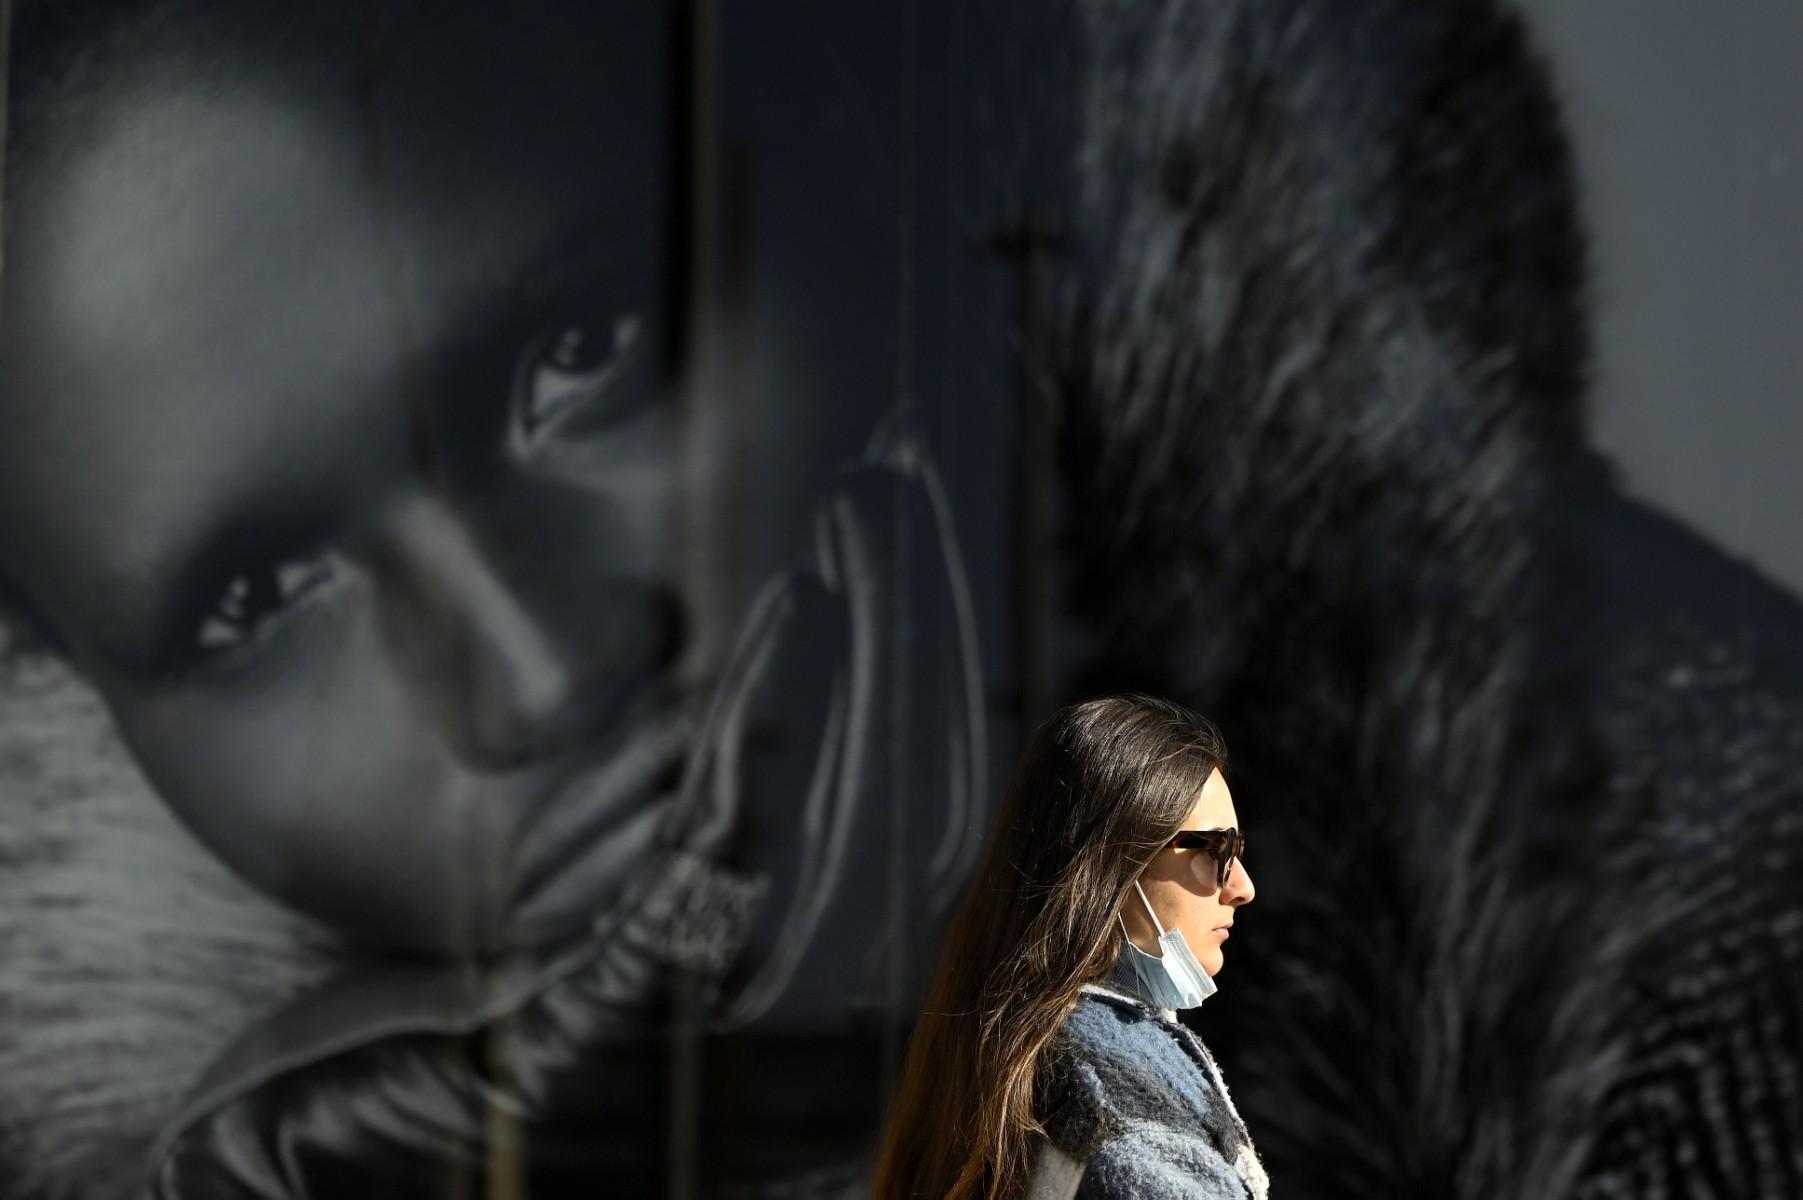 A woman walks in the street without wearing her face mask in Madrid on Jan 27. Photo: AFP